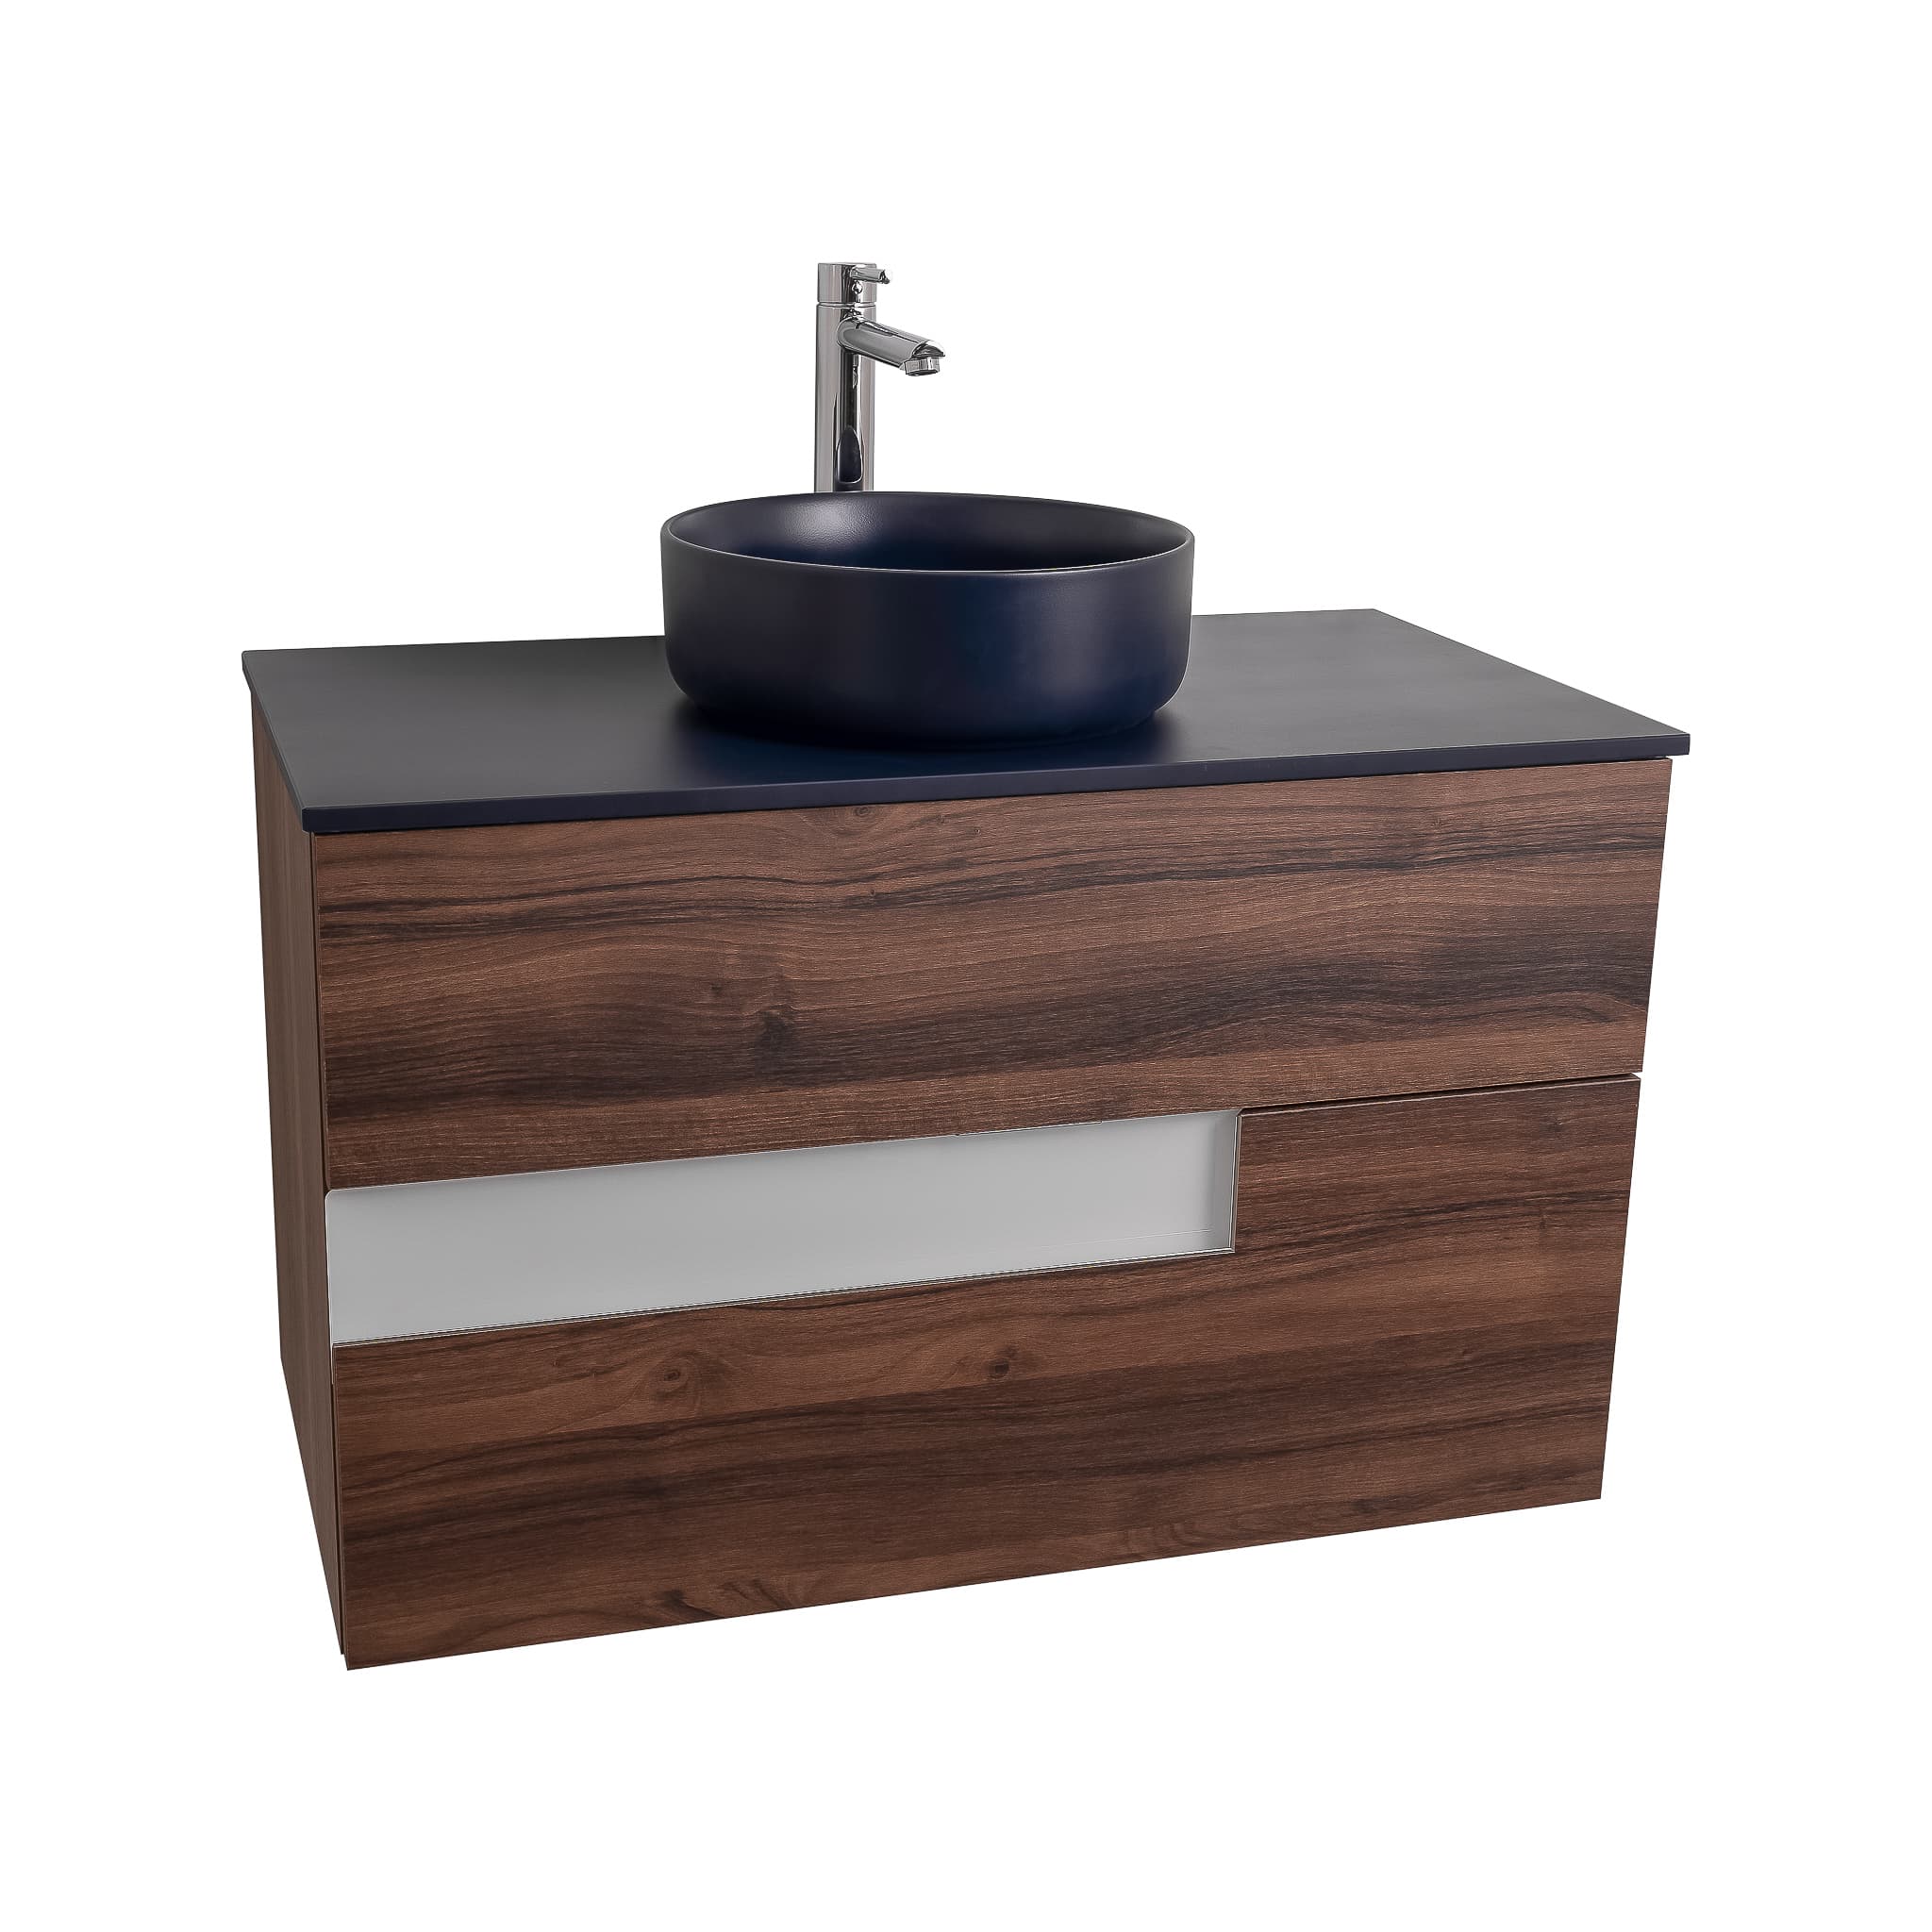 Vision 39.5 Valenti Medium Brown Wood Cabinet, Ares Navy Blue Top And Ares Navy Blue Ceramic Basin, Wall Mounted Modern Vanity Set